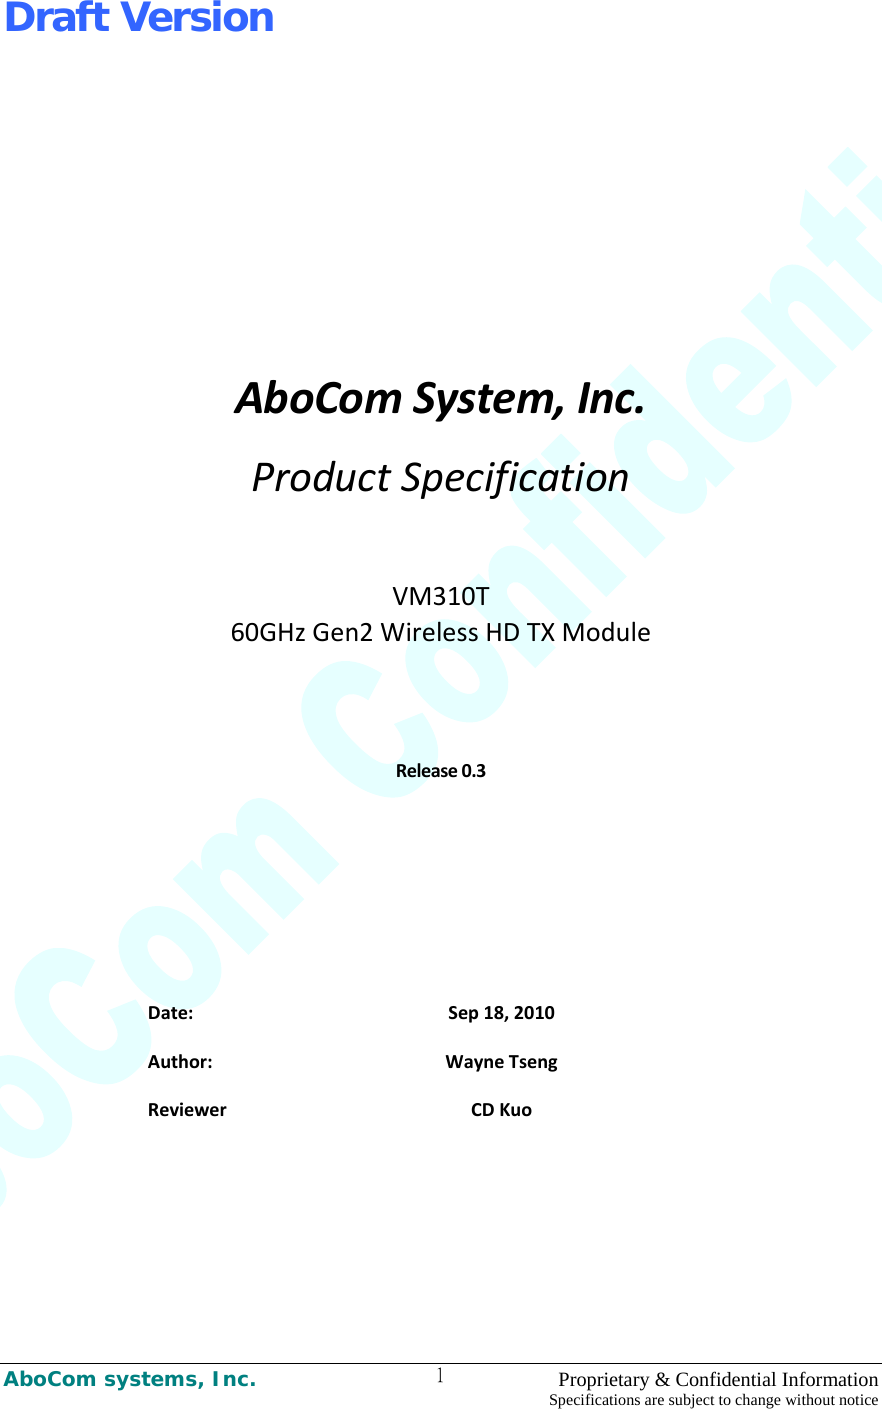 Draft Version AboCom systems, Inc.    Proprietary &amp; Confidential Information Specifications are subject to change without notice 1AboComSystem,Inc.ProductSpecificationVM310T60GHzGen2WirelessHDTXModuleRelease0.3Date:Sep18,2010Author:WayneTsengReviewerCDKuo